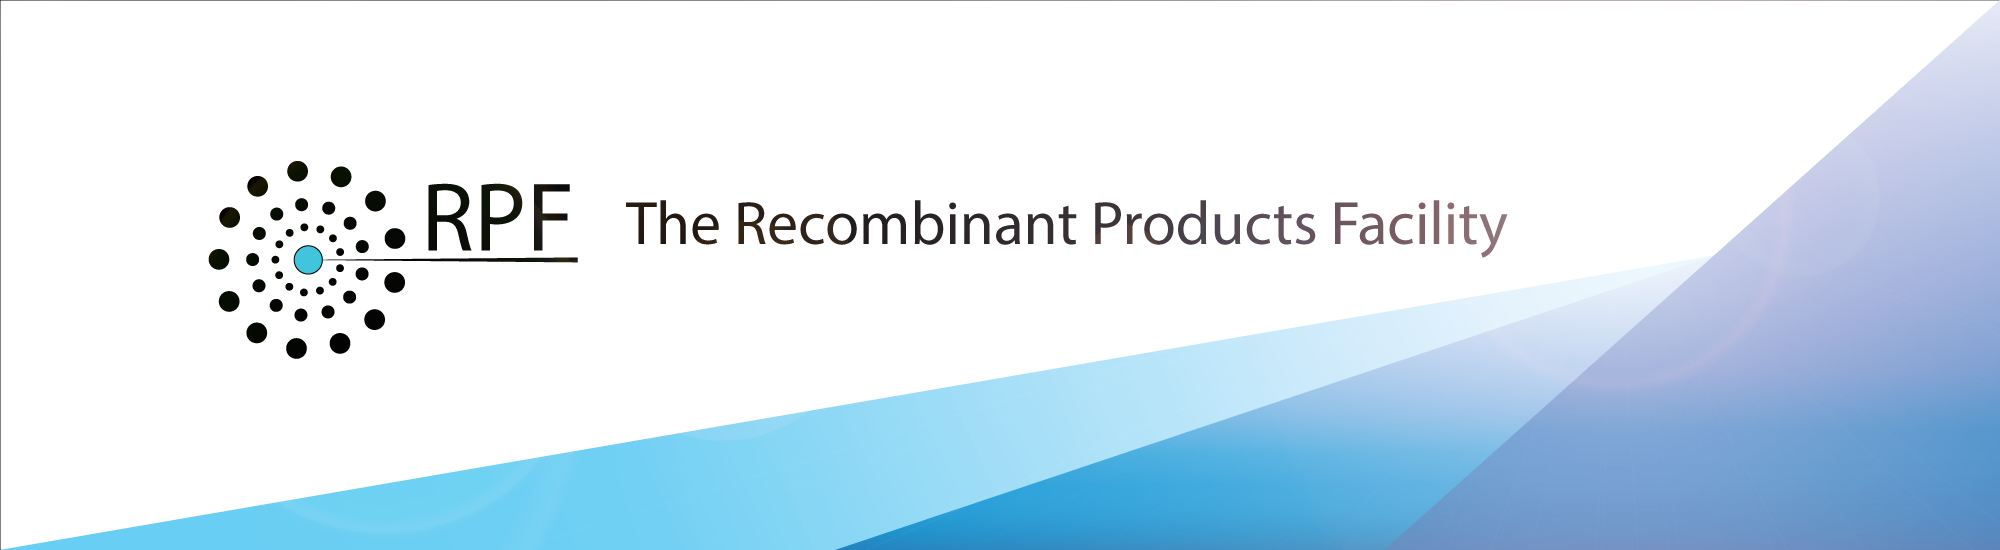 Recombinant products facility